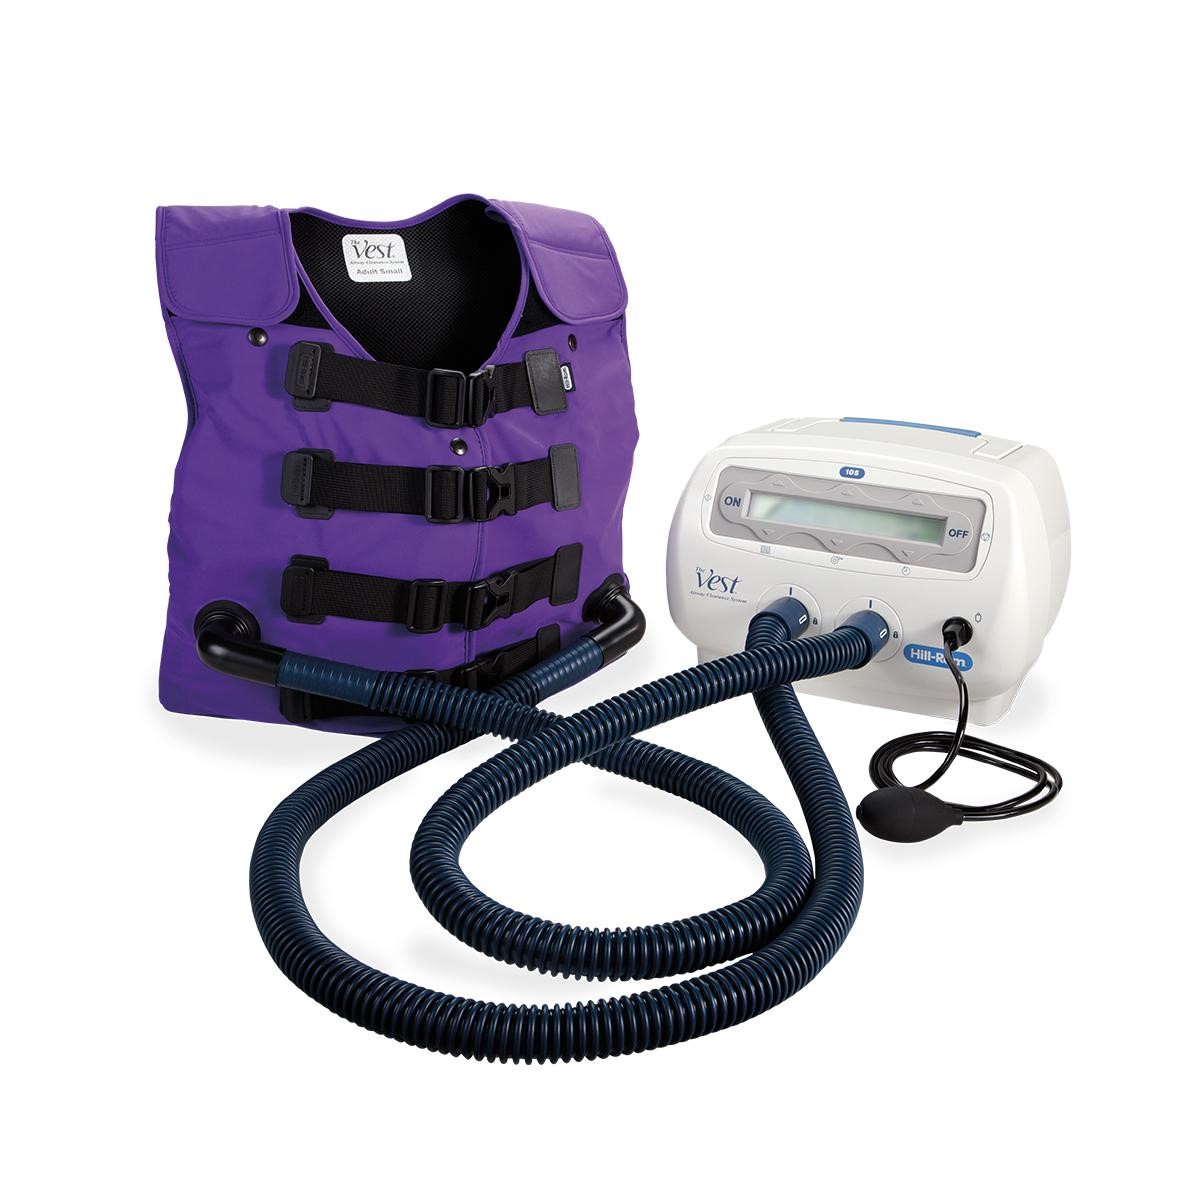 MÁY VỖ RUNG LỒNG NGỰC - The Vest® Airway Clearance System model 105